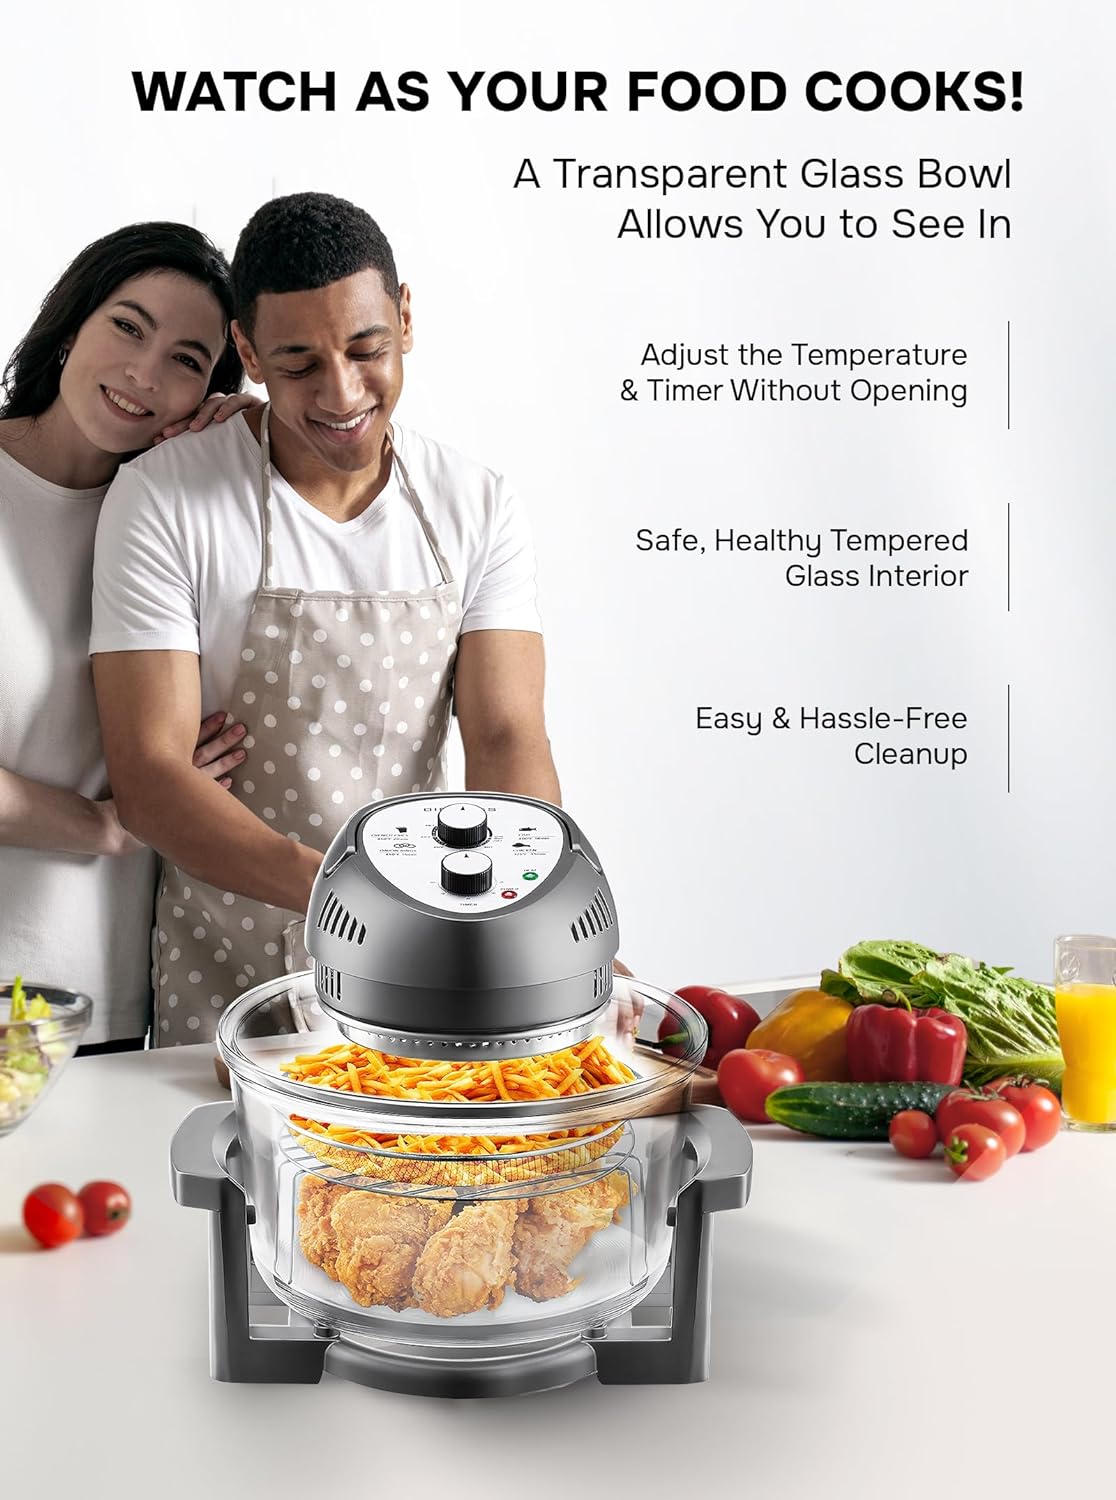 Deep Fryer - 4-liter Electric Oil Fryer - 1 Large Basket And 2 Small For  Dual Use - Stainless-steel Cooker With Cool Touch Features By Classic  Cuisine : Target